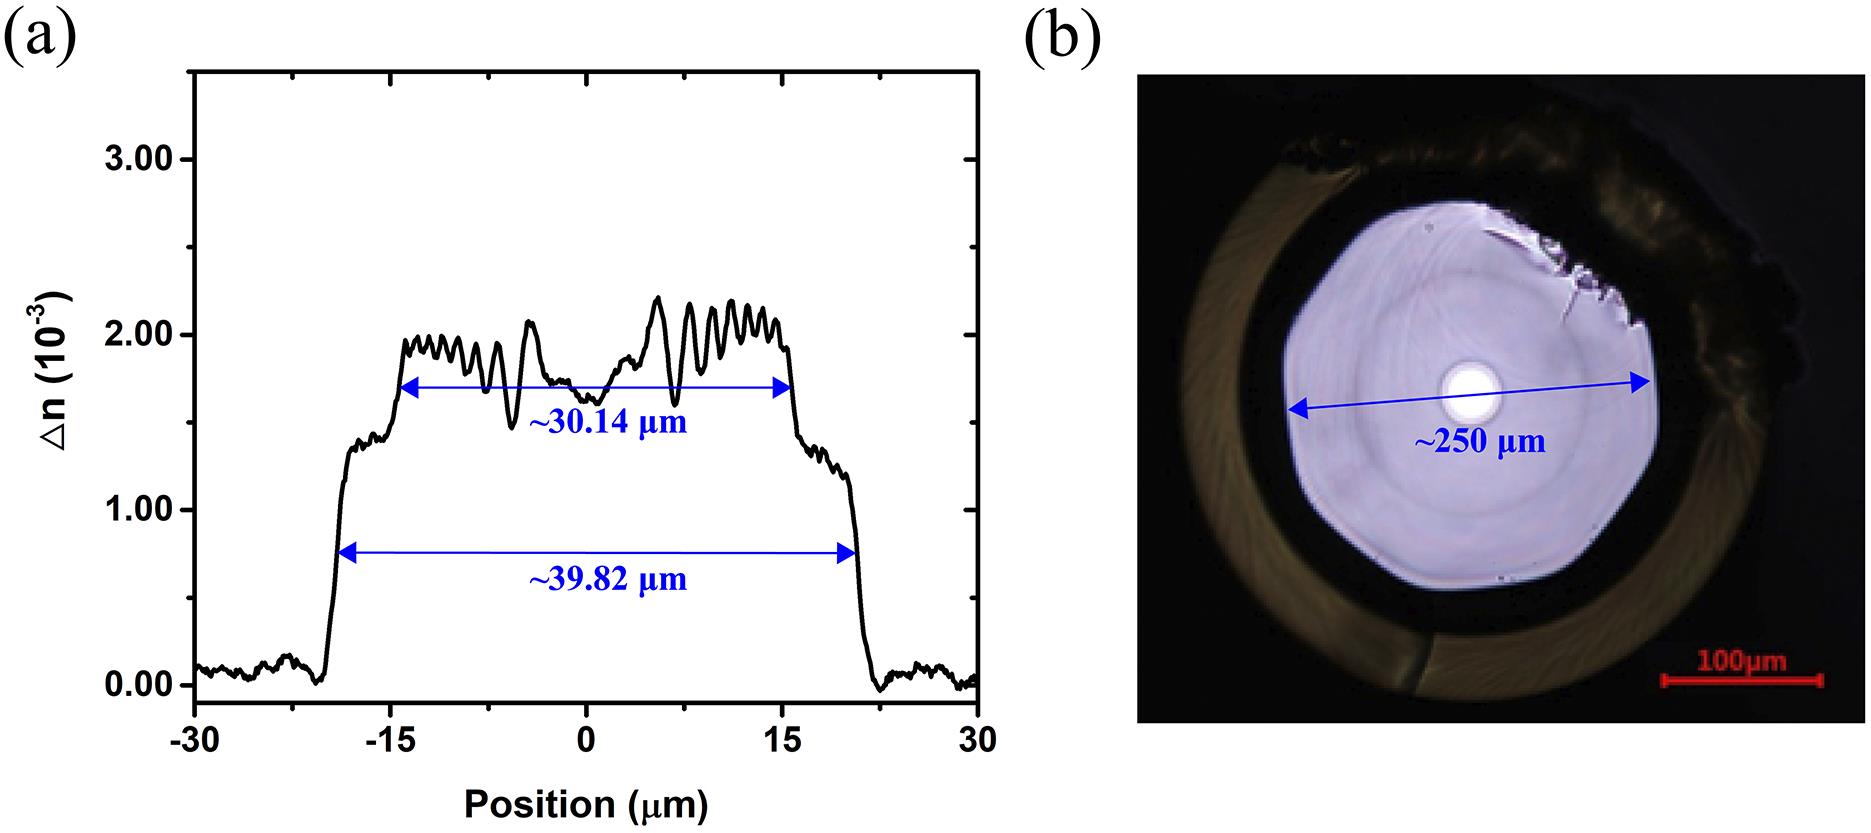 (a) Refractive index profile of the fiber across the core region; (b) cross-section photograph of the confined-doped fiber.